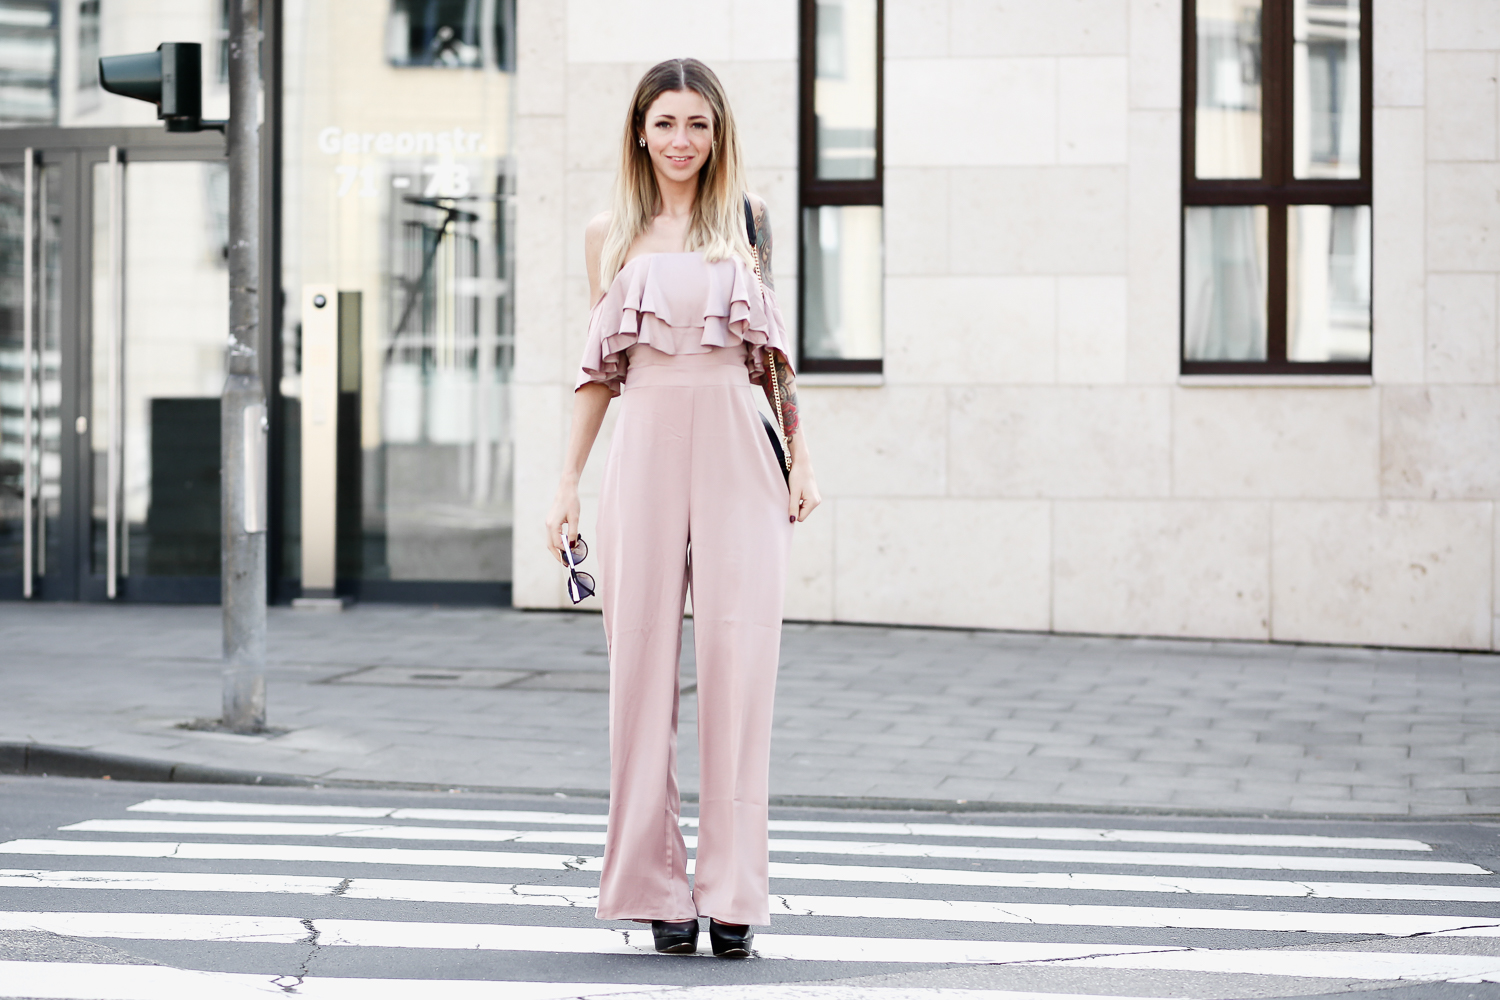 modeblog-fashionblog-outfit-ootd-koeln-jumpsuit-moschino-bag-spring-2017-style